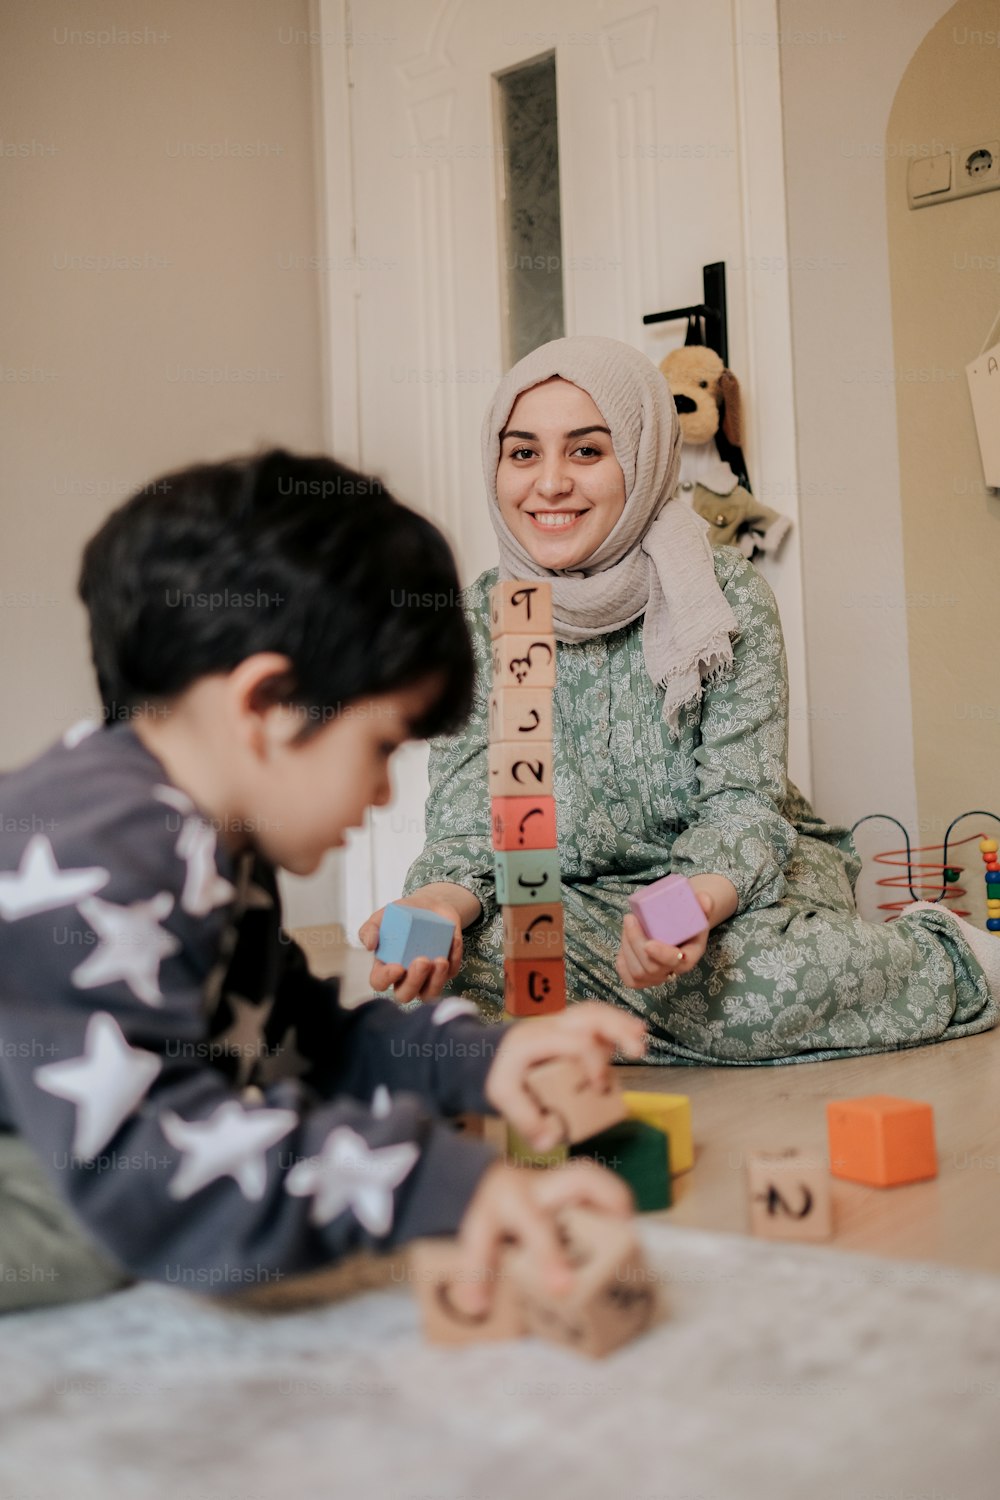 a woman sitting on the floor playing with blocks